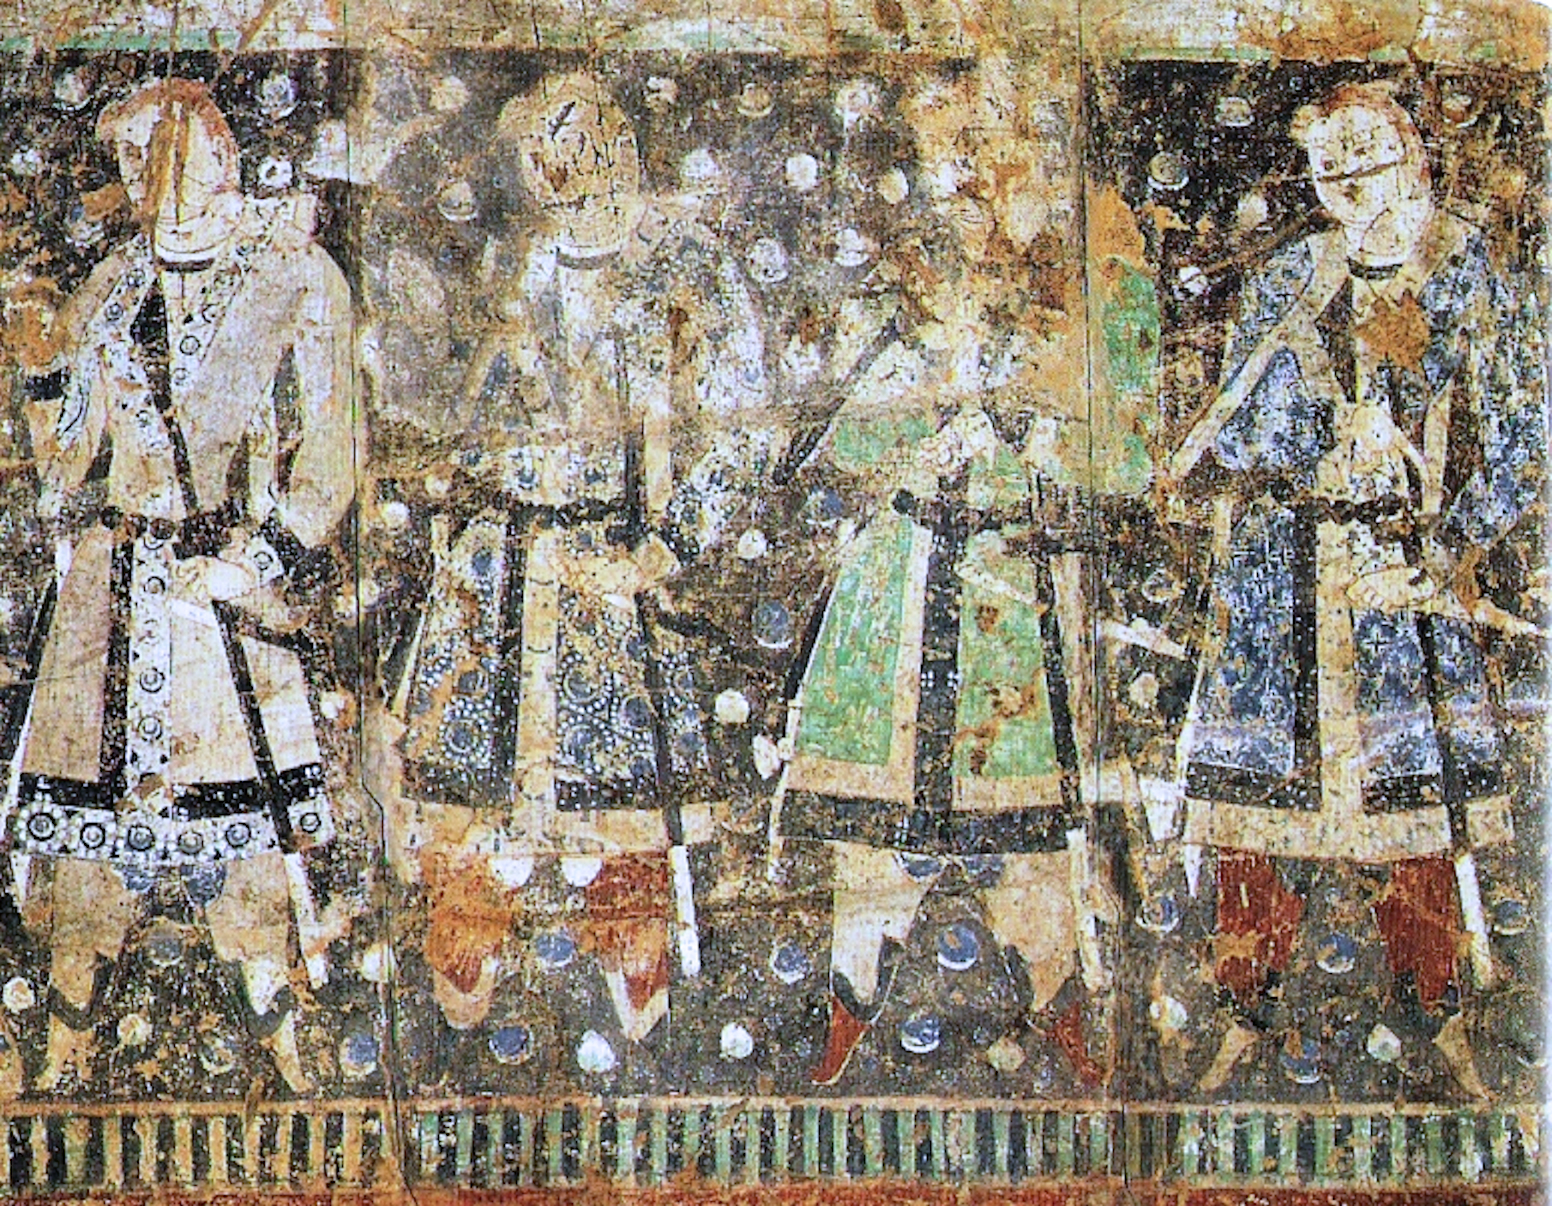 6th Century "Tocharian Donors"